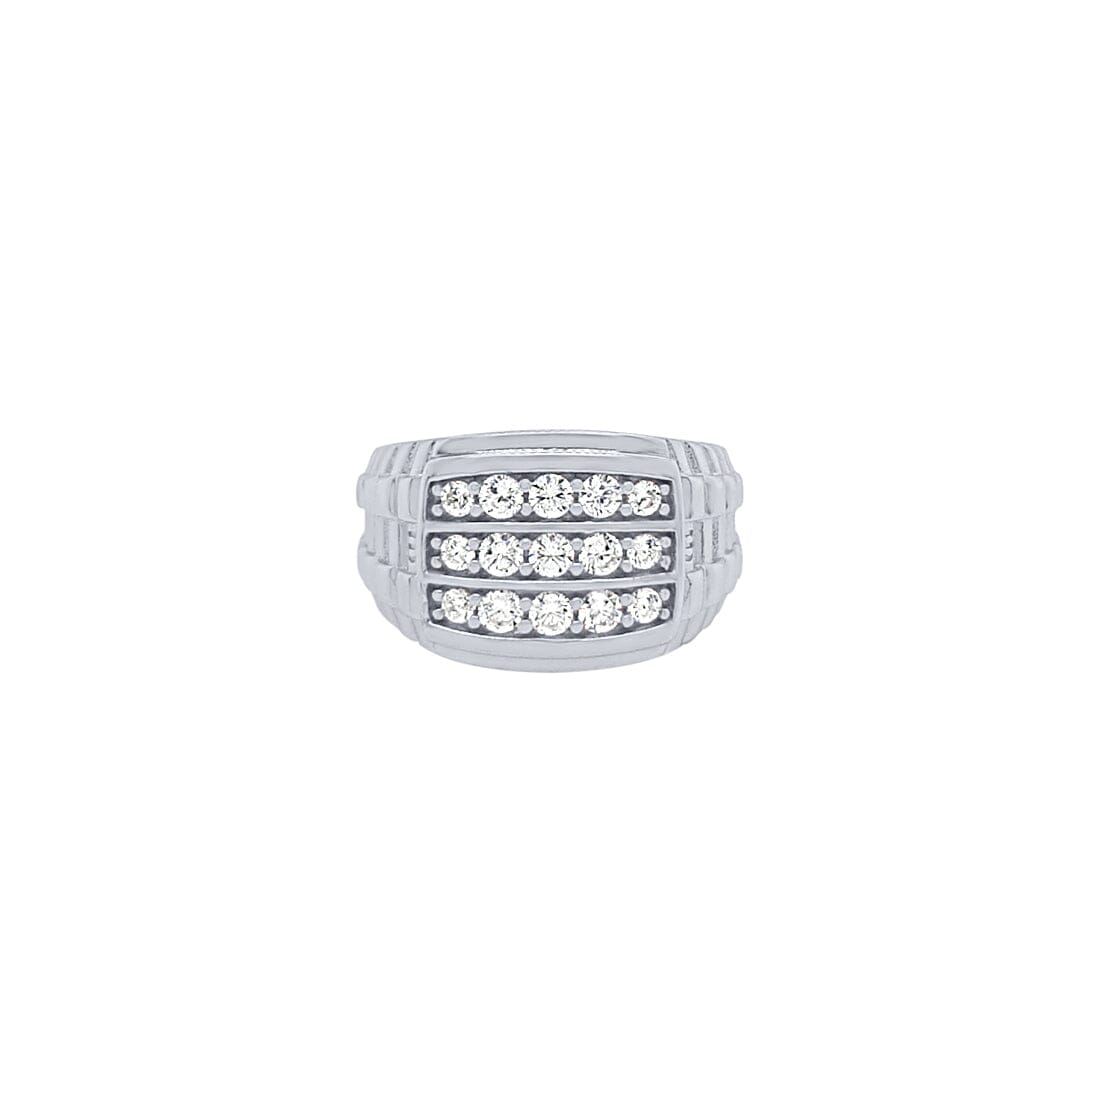 Three Row Patterened Ring with Cubic Zirconia in Sterling Silver Rings Bevilles 